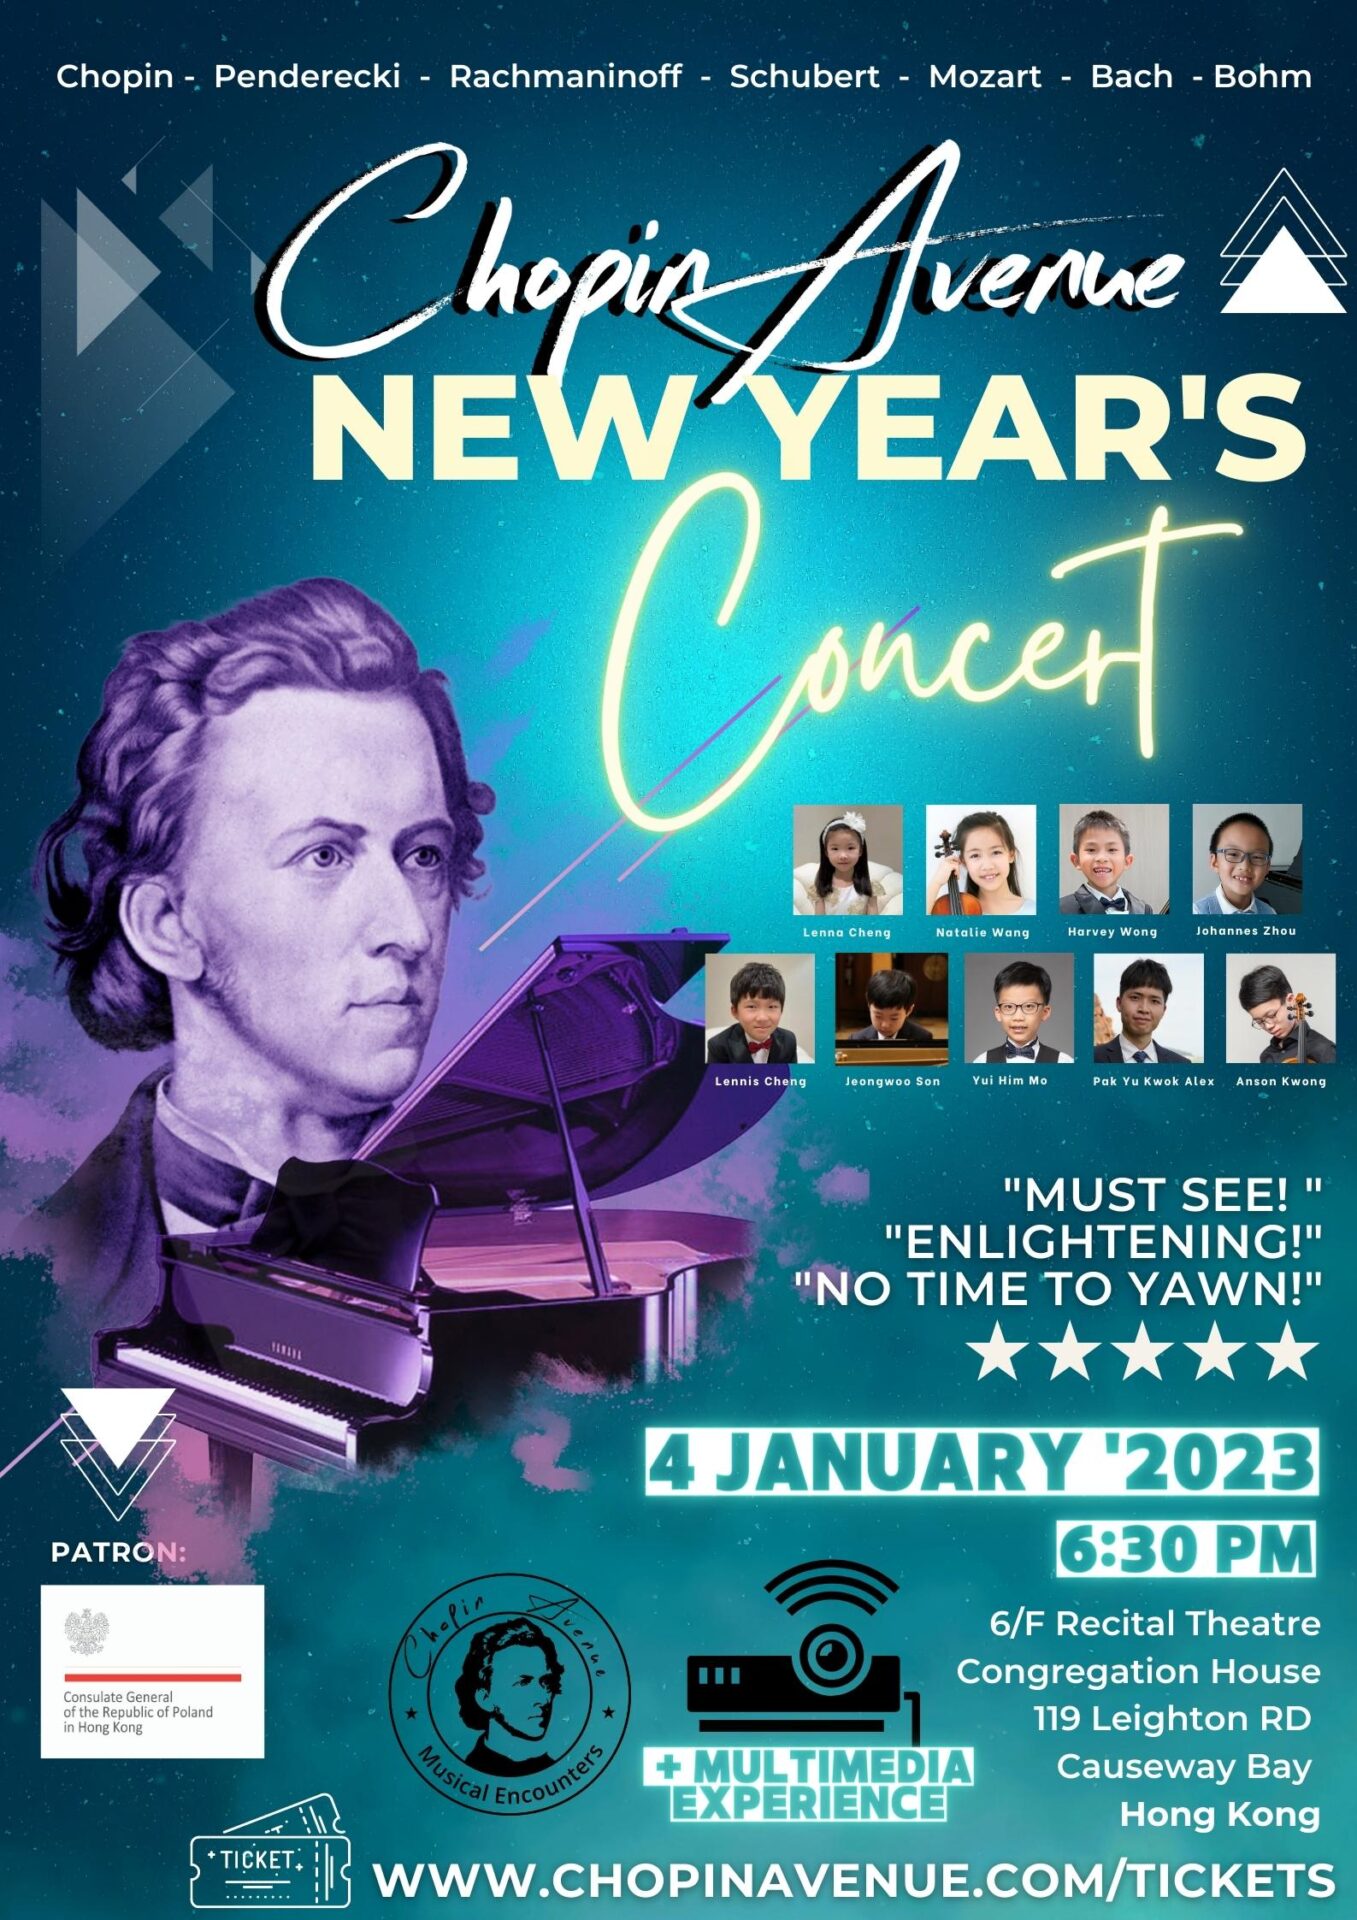 Chopin Avenue NEW YEAR'S Concert